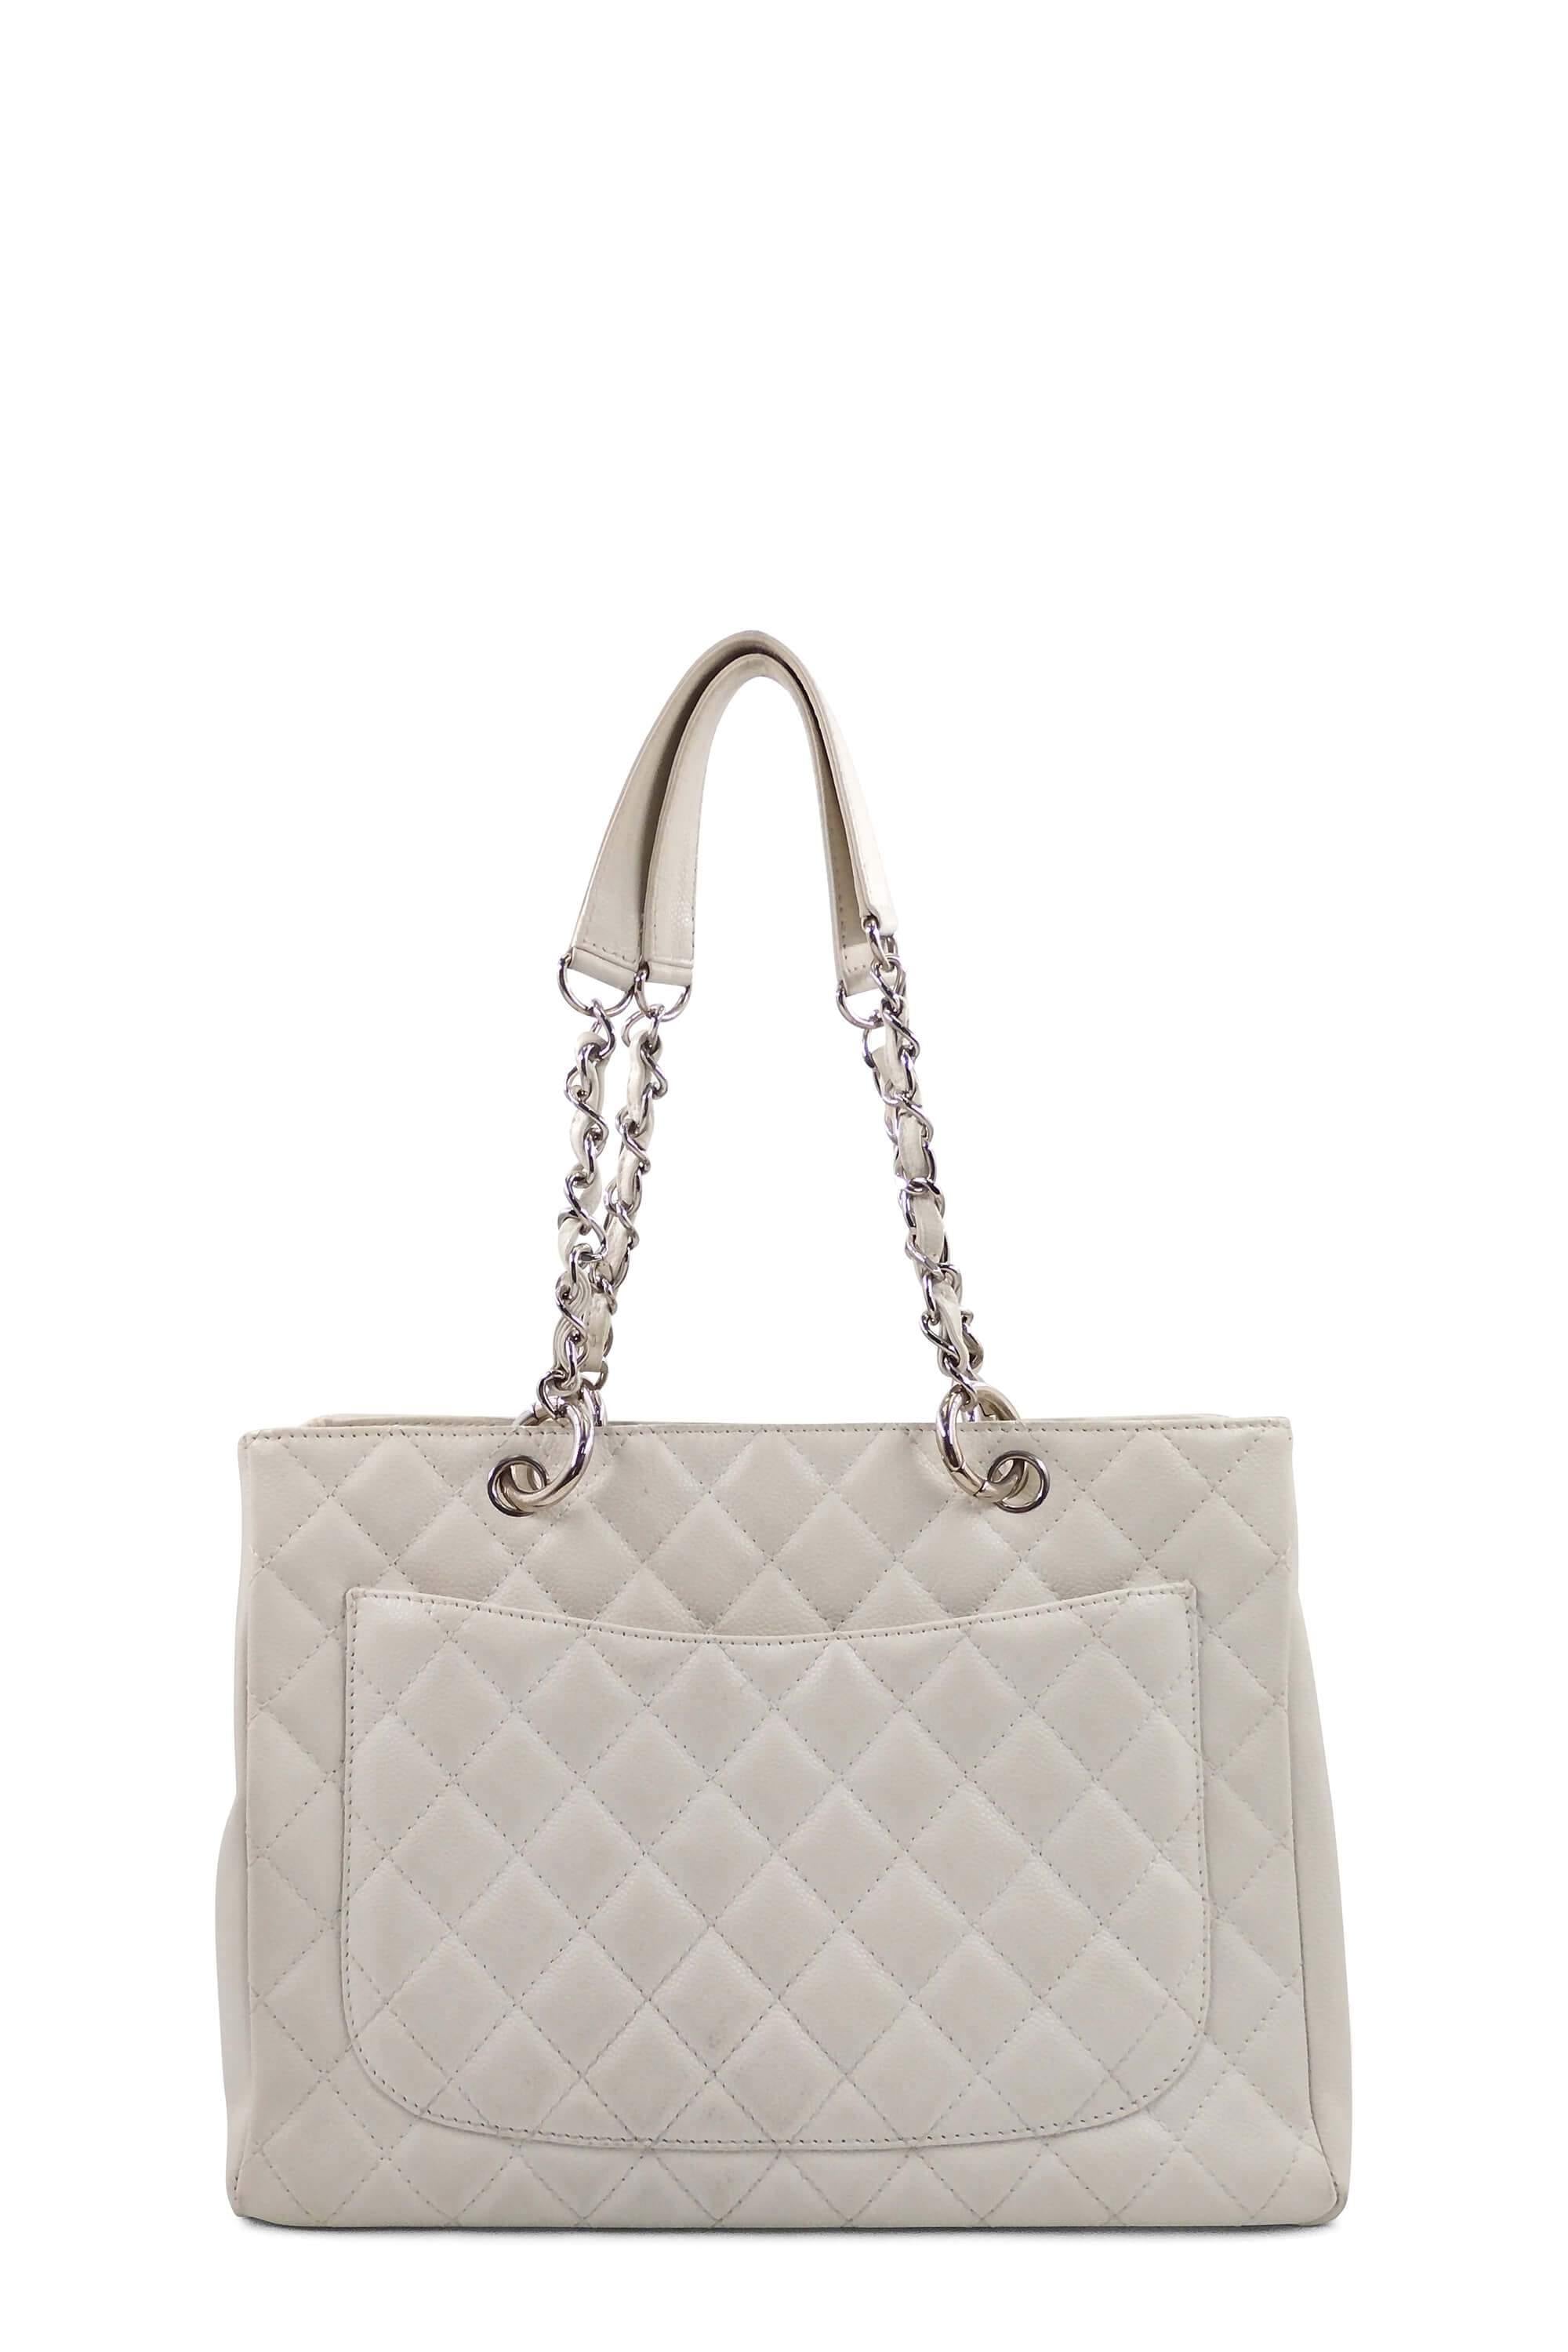 Grand Shopping Tote White with Silver Hardware